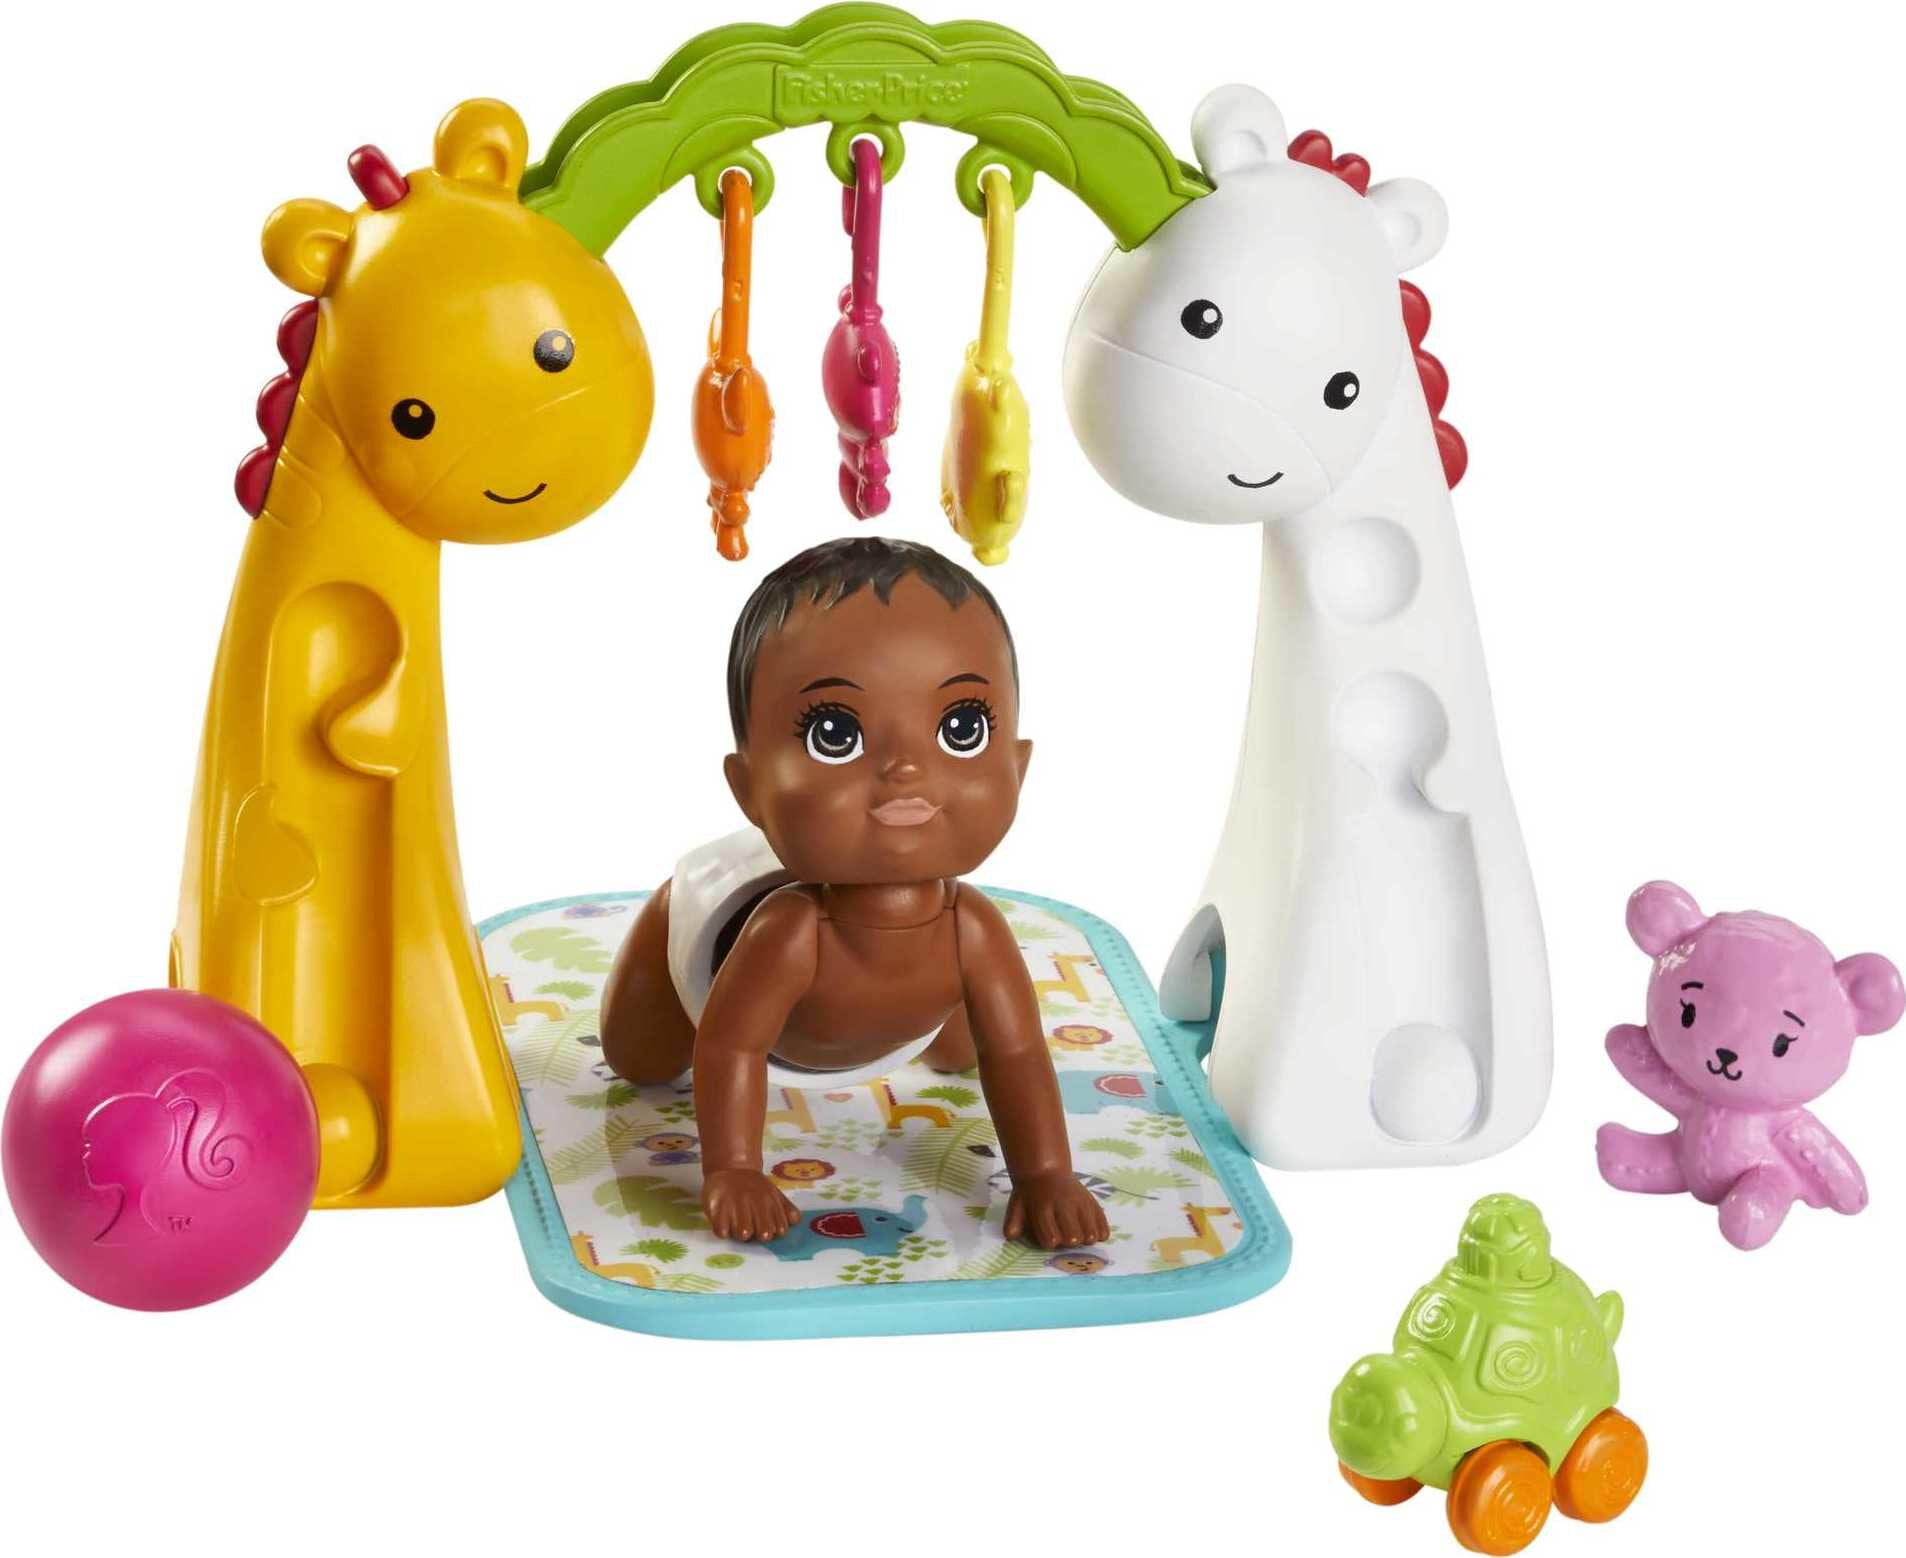 Mattel GHV84 Feeding and Bath-Time Playset for sale online 